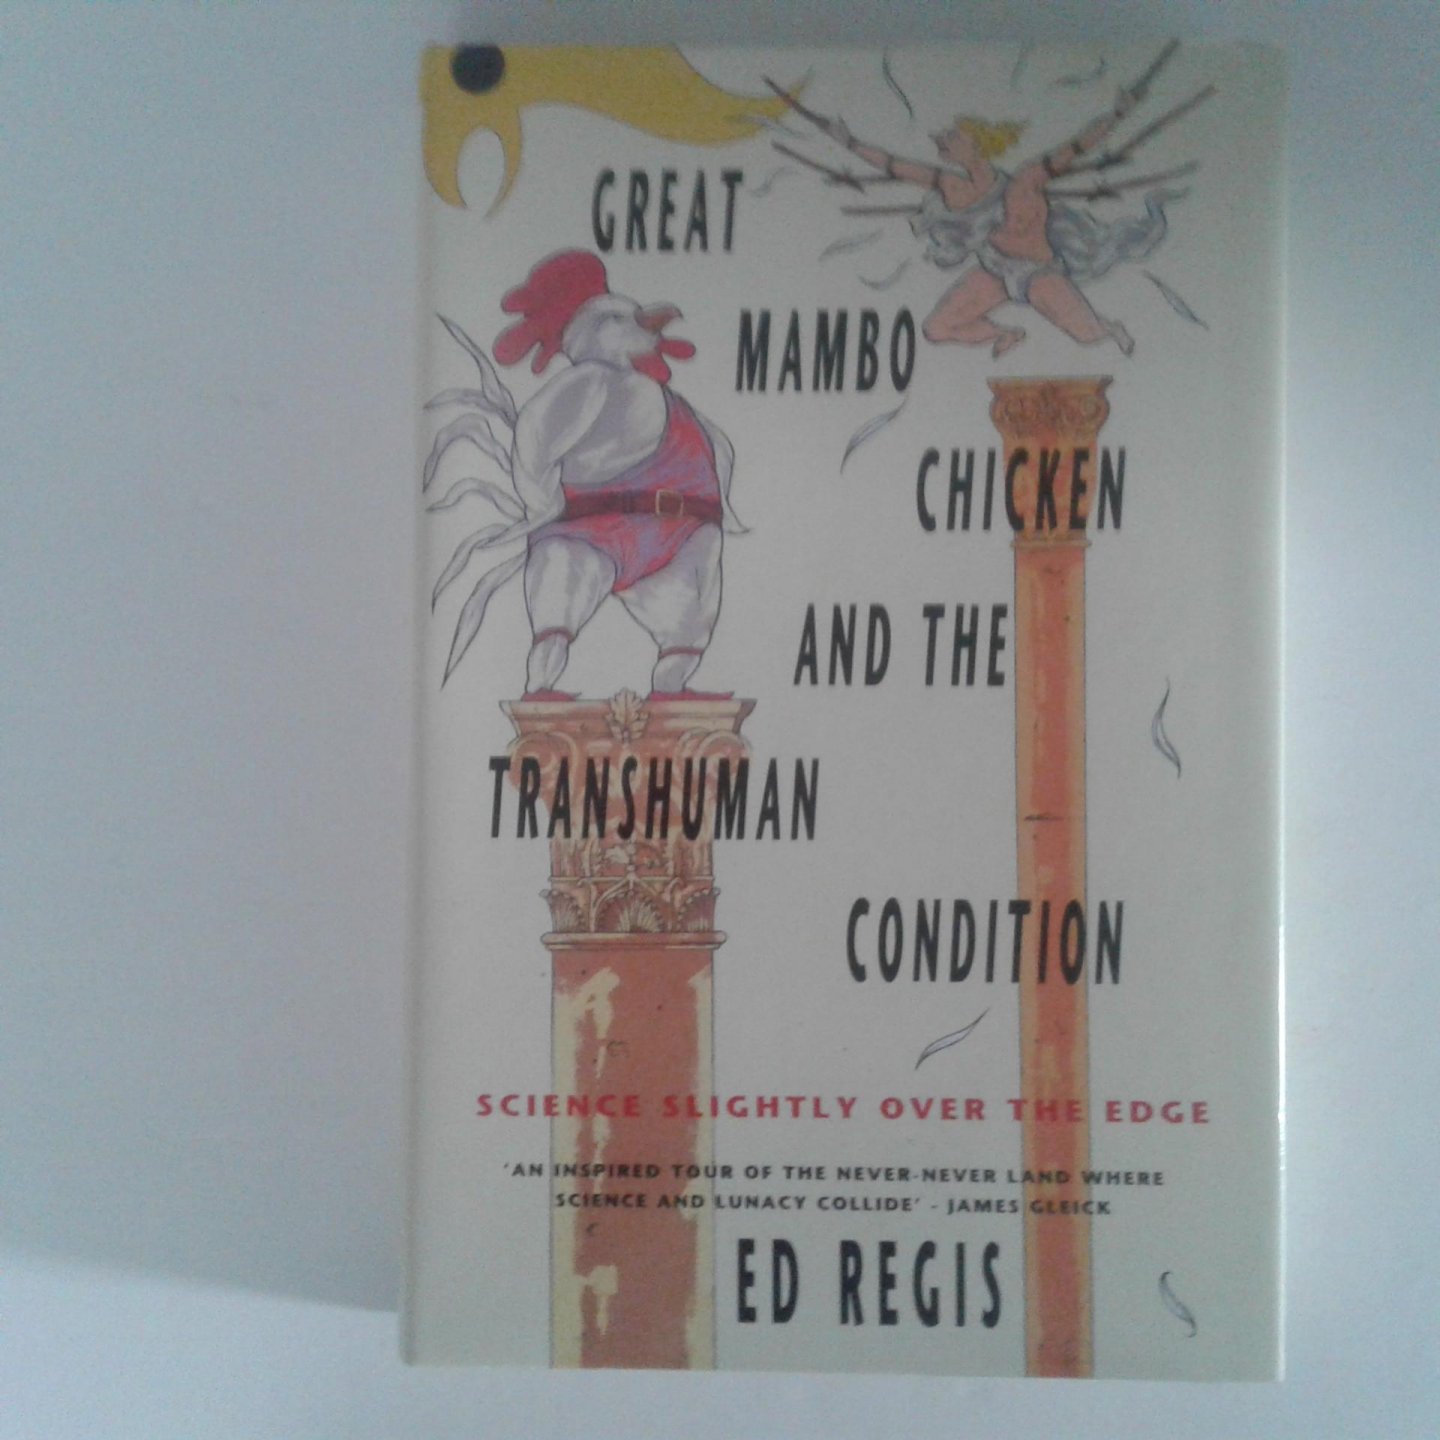 Regis, Ed - Great Mambo Chicken and the Transhuman Condition ; Science slightly over the edge